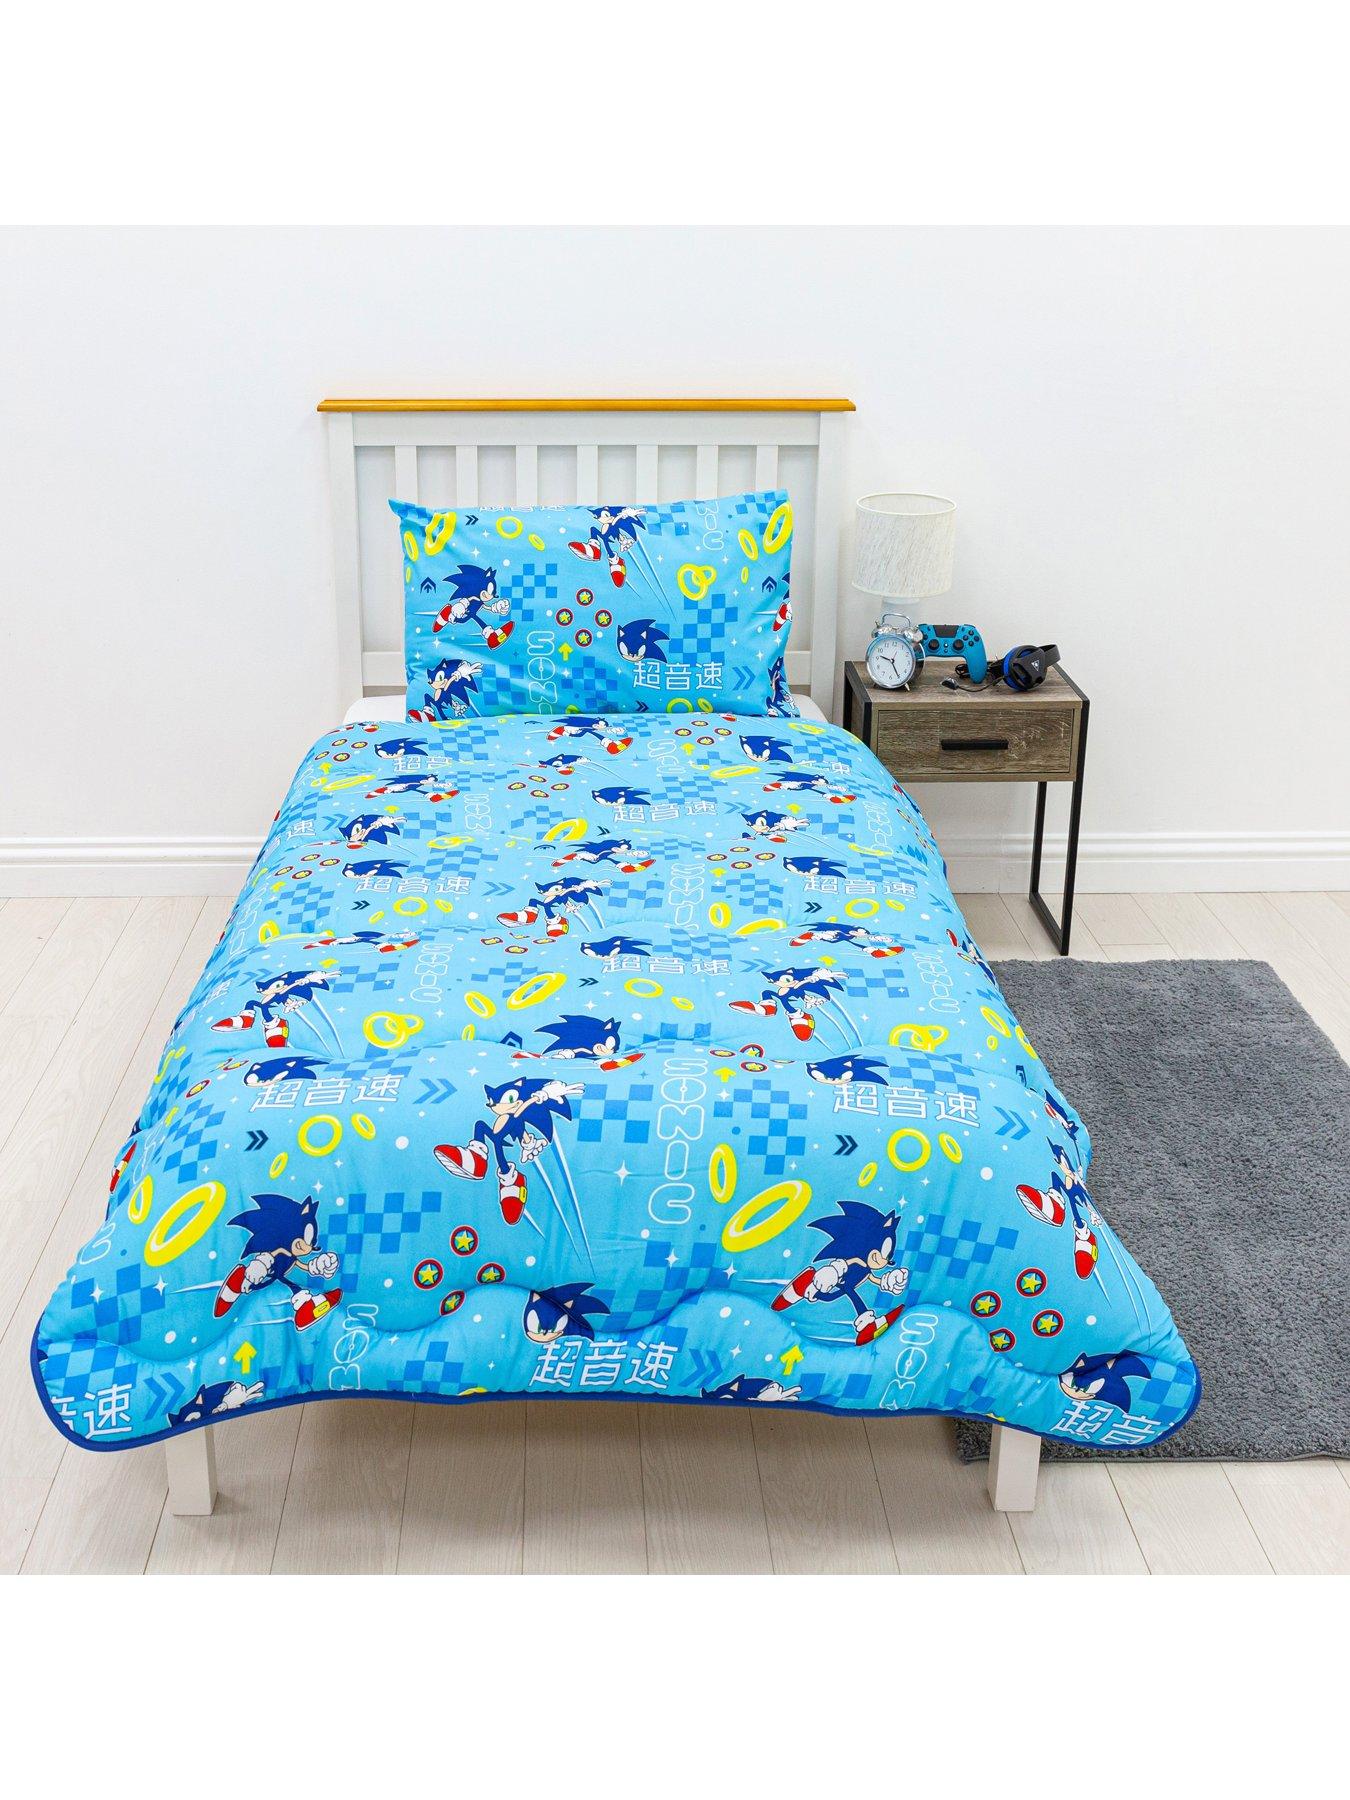 KIDS POLYCOTTON NOVELTY USED SALE Details about   QUILT COVER SET CHILDS SINGLE BED 